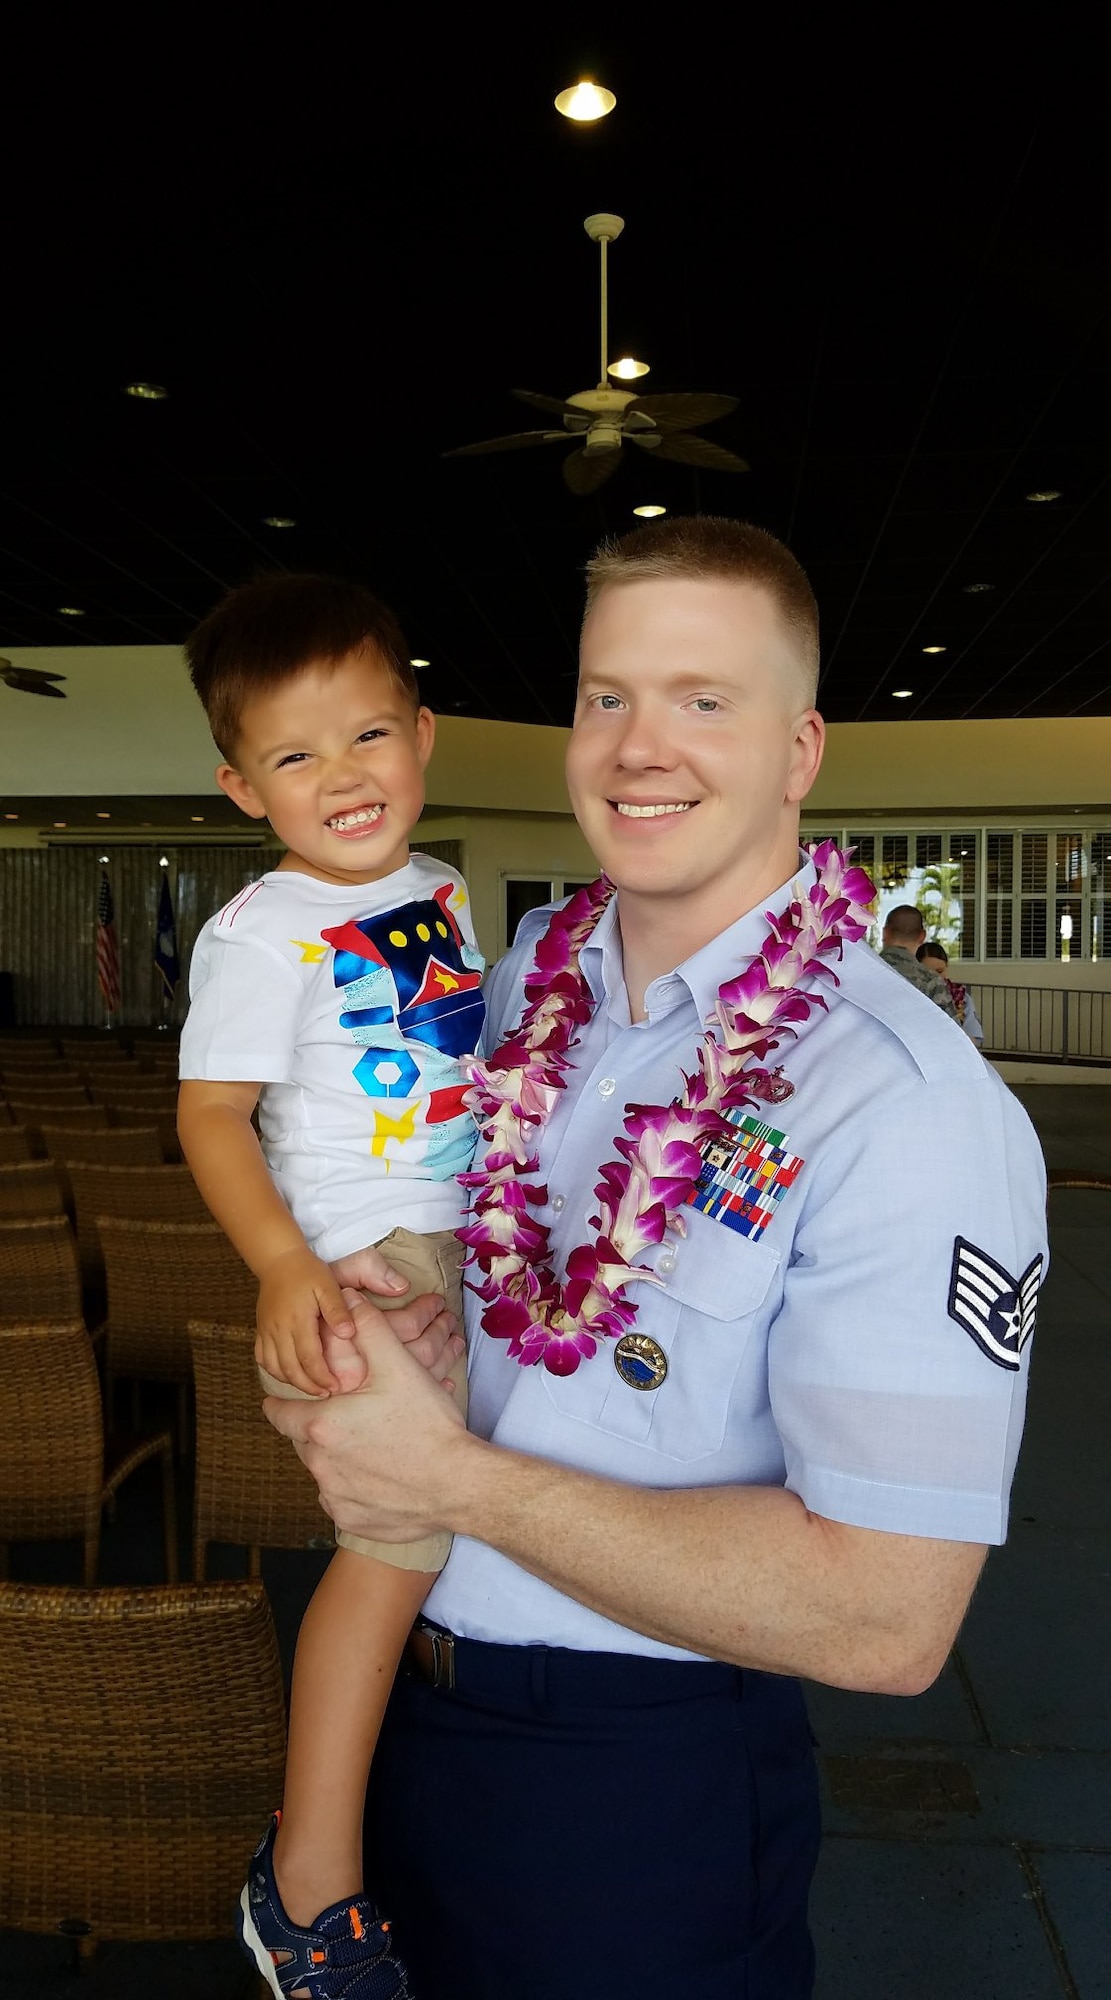 Tech. Sgt. Josef Margetiak, 614th Air Operations Center section chief, poses for a photo with his son at his Community College of the Air Force graduation. In late 2018, Margetiak was diagnosed with testicular seminoma cancer, and once cleared, he was diagnosed again in 2019. Throughout his fight with testicular cancer, Margetiak has been motivated by both his family and his goals to become a Physical Therapy to help others be the best versions of themselves, while pushing forward resiliently to complete his everyday duties. (Courtesy photo)